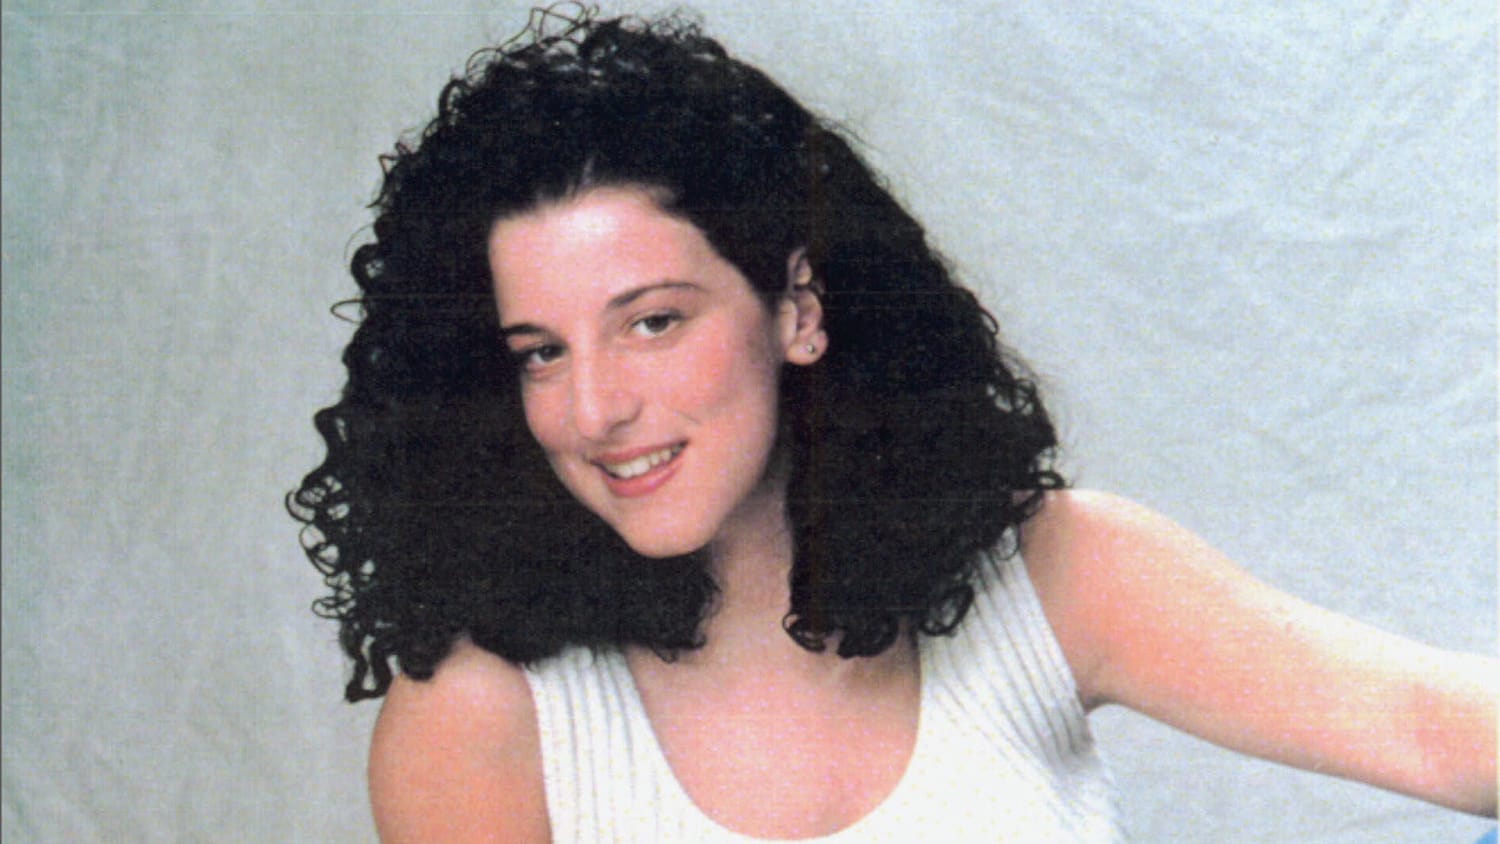 Murdered . intern Chandra Levy's parents still feel 'tremendous sadness'  15 years later